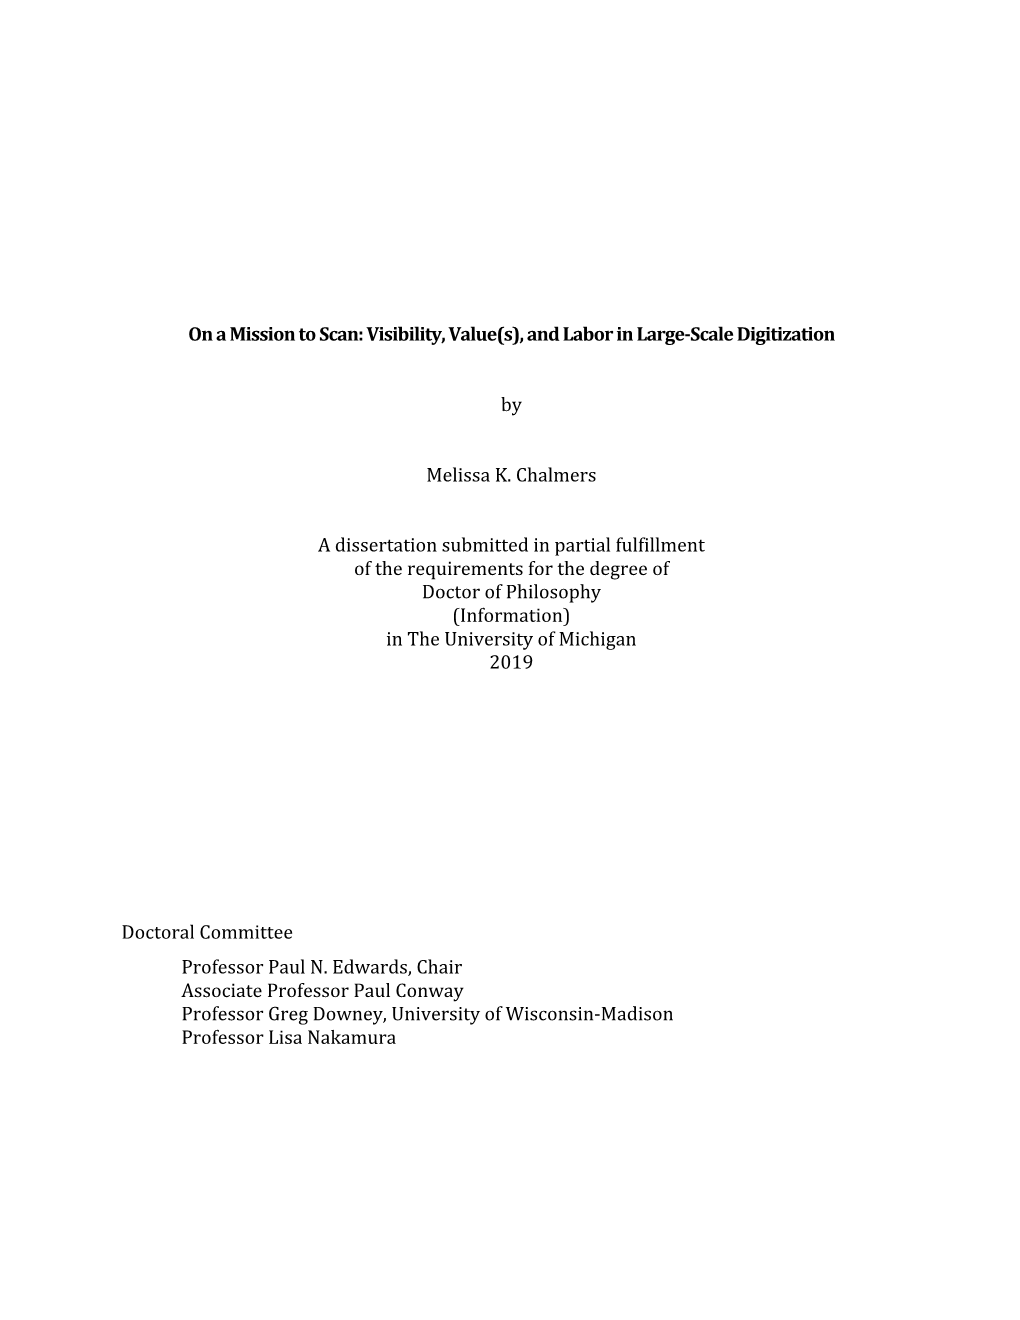 And Labor in Large-Scale Digitization by Melissa K. Chalmers A